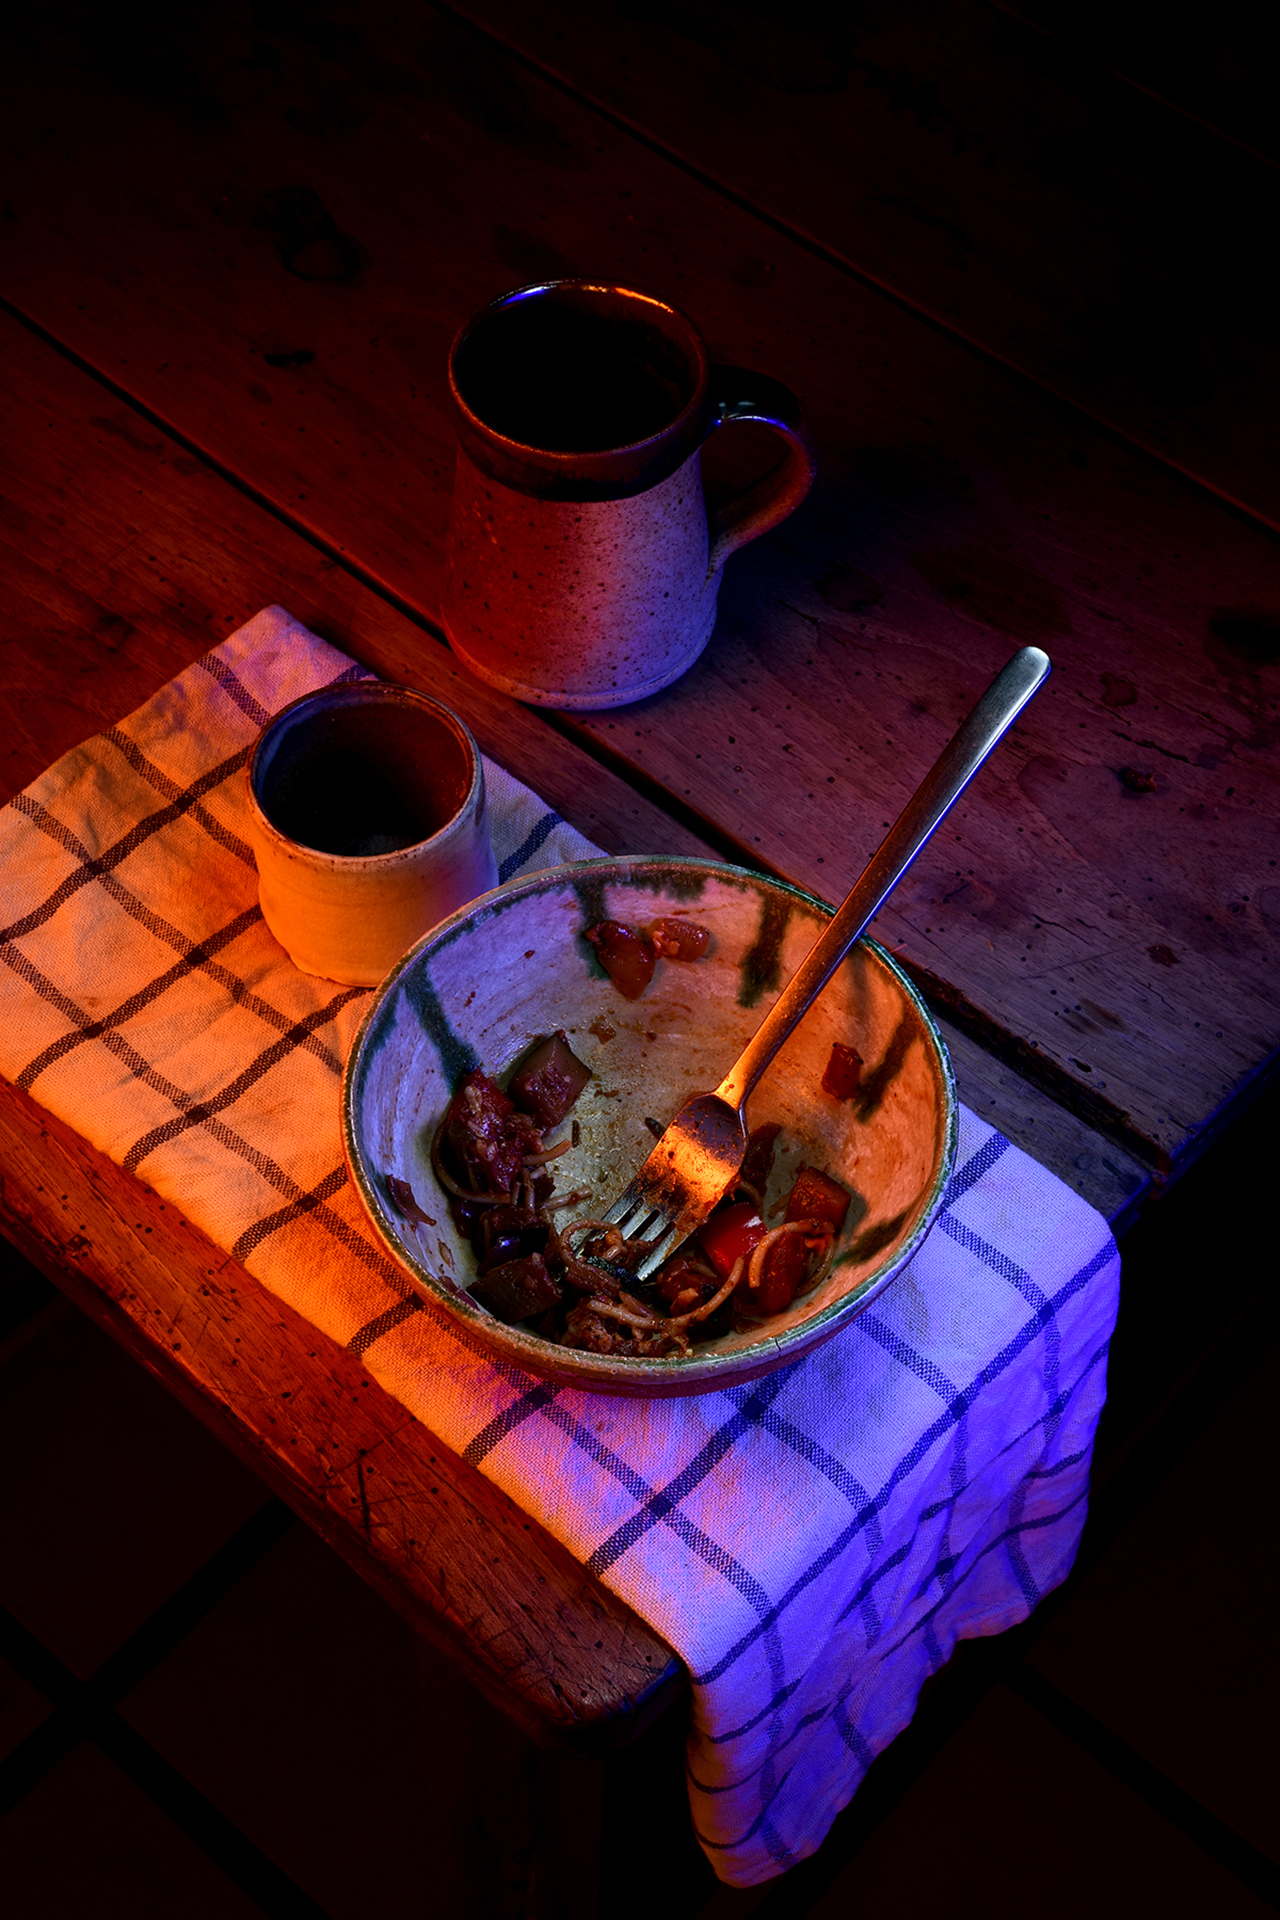 This photo depicts an empty bowl of pasta on the corner of a table, the scene is dimly lit with soft tones.